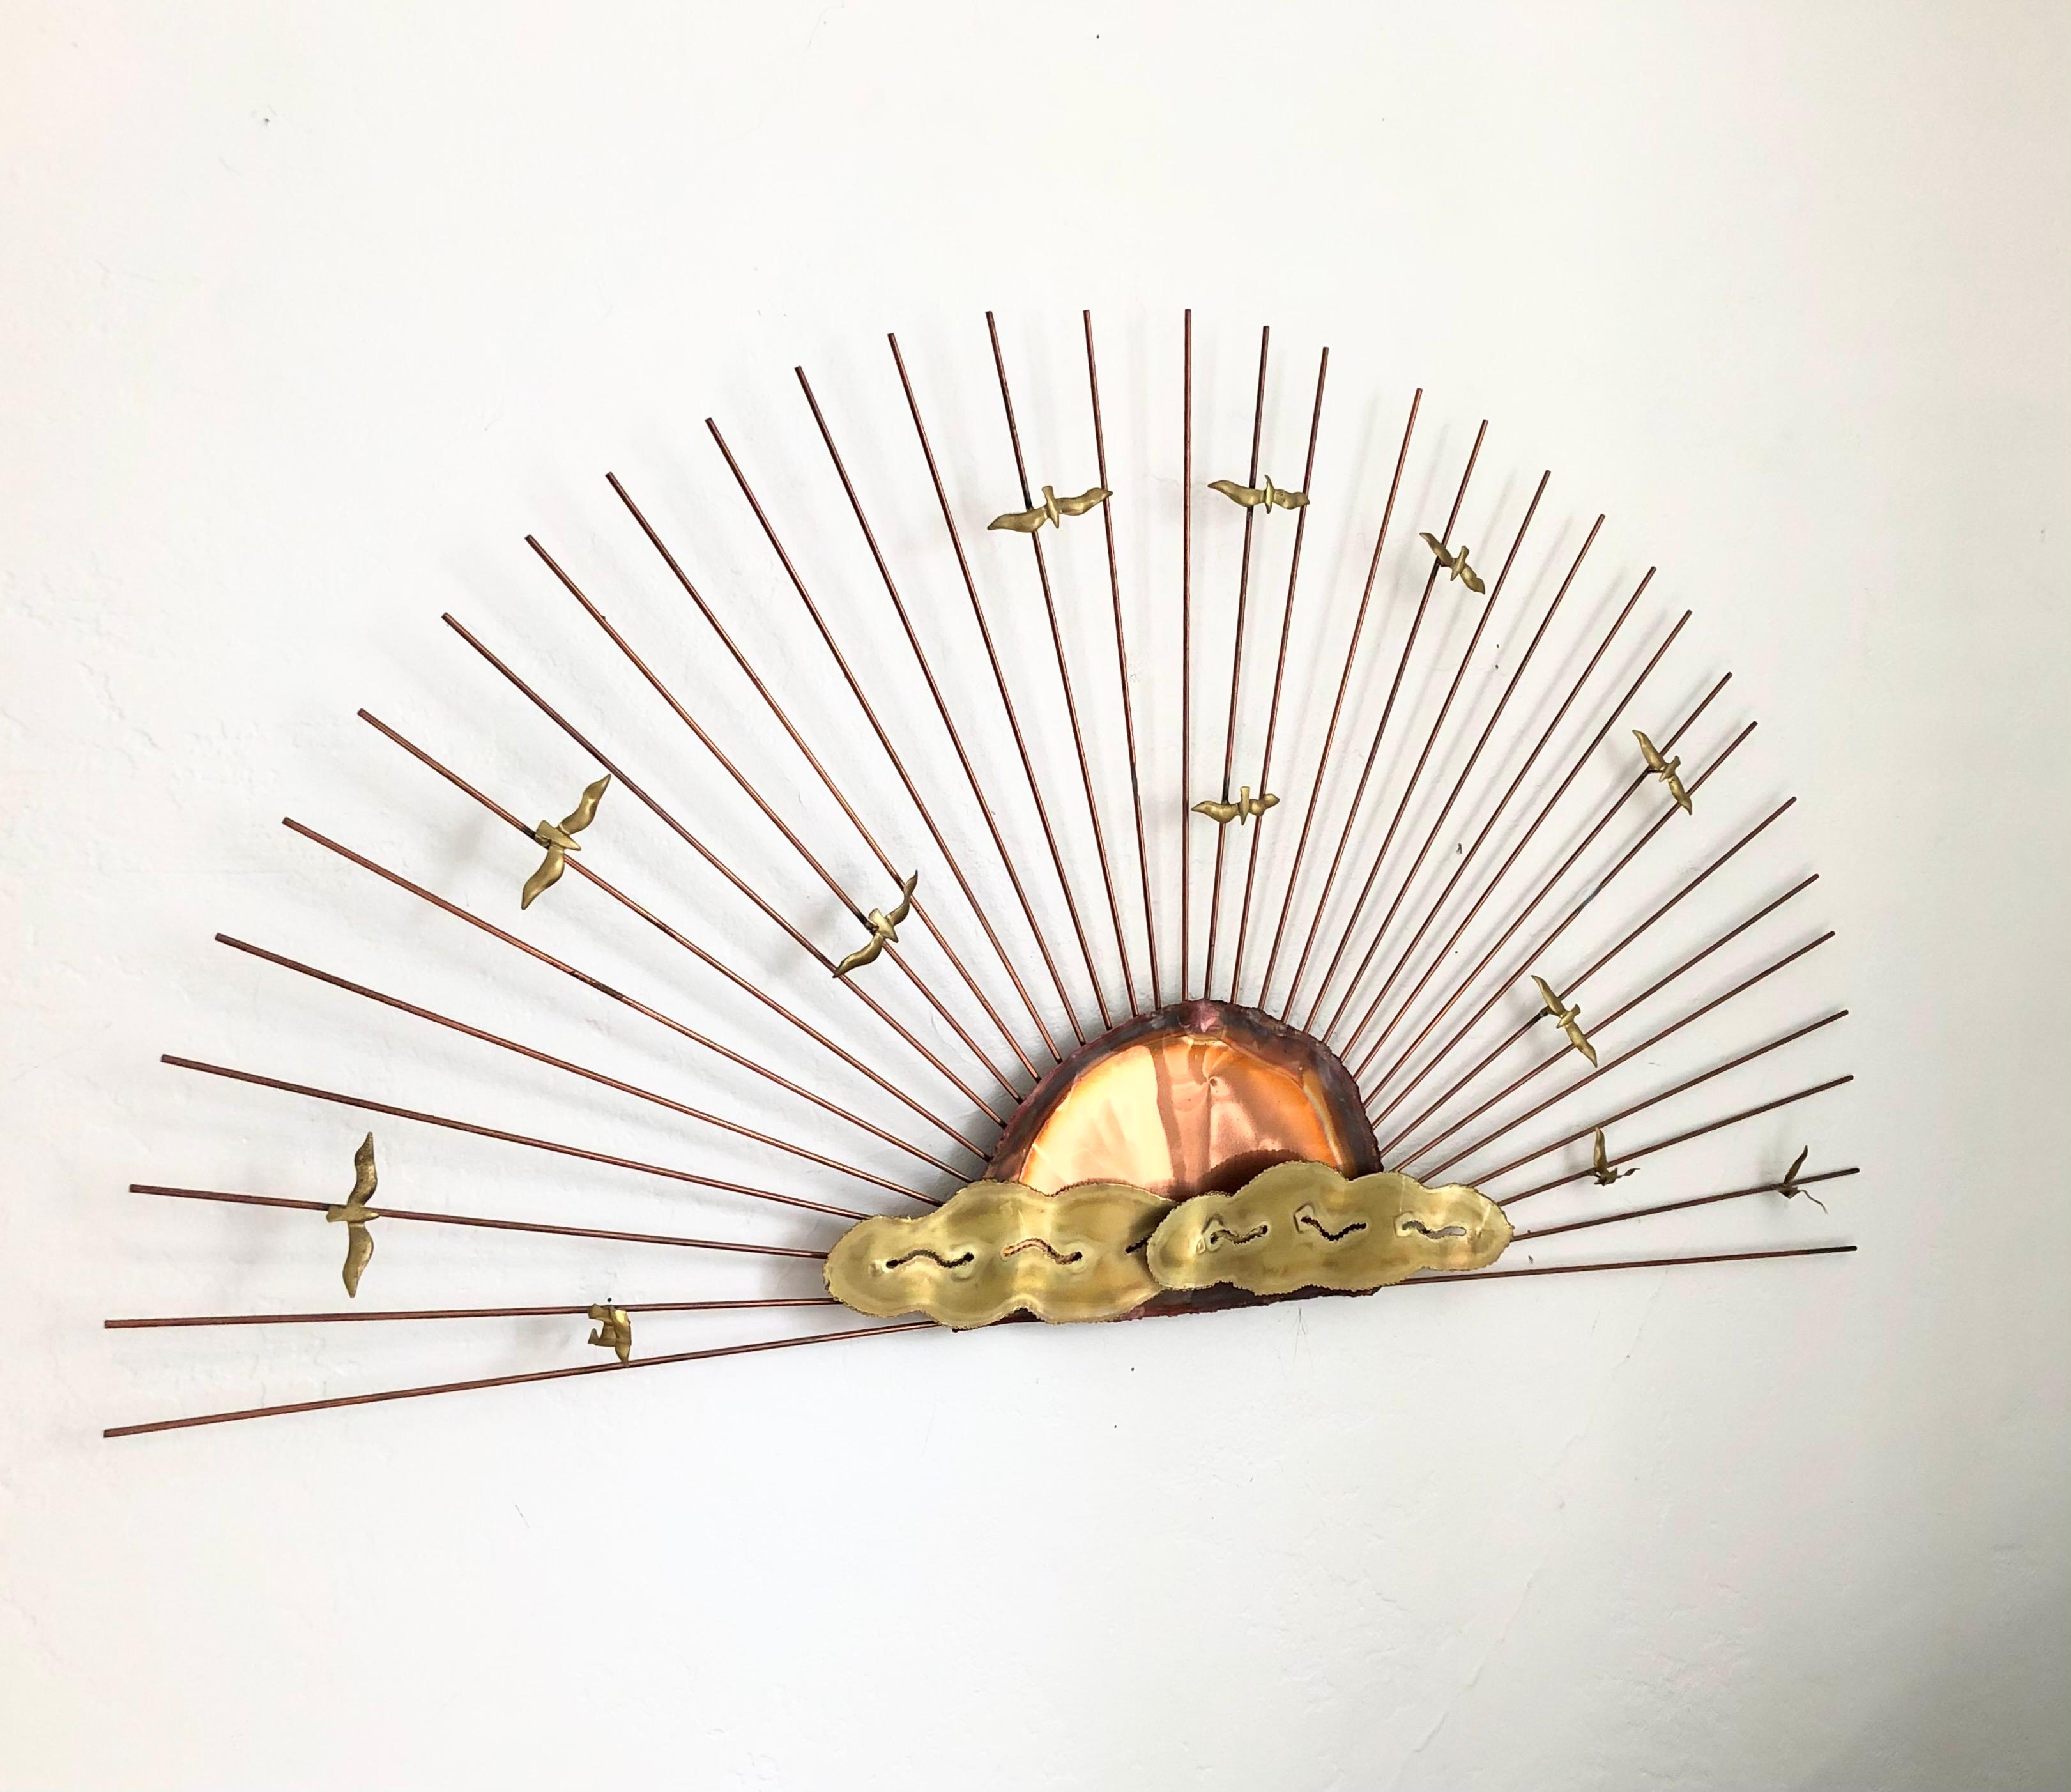 A mid century brass seagull sunburst wall hanging in the style of Curtis Jere. Thin brass rods have been arranged in a semi circular shape around a copper and brass sun in the center to create a sunburst effect. And organic arrangement of small